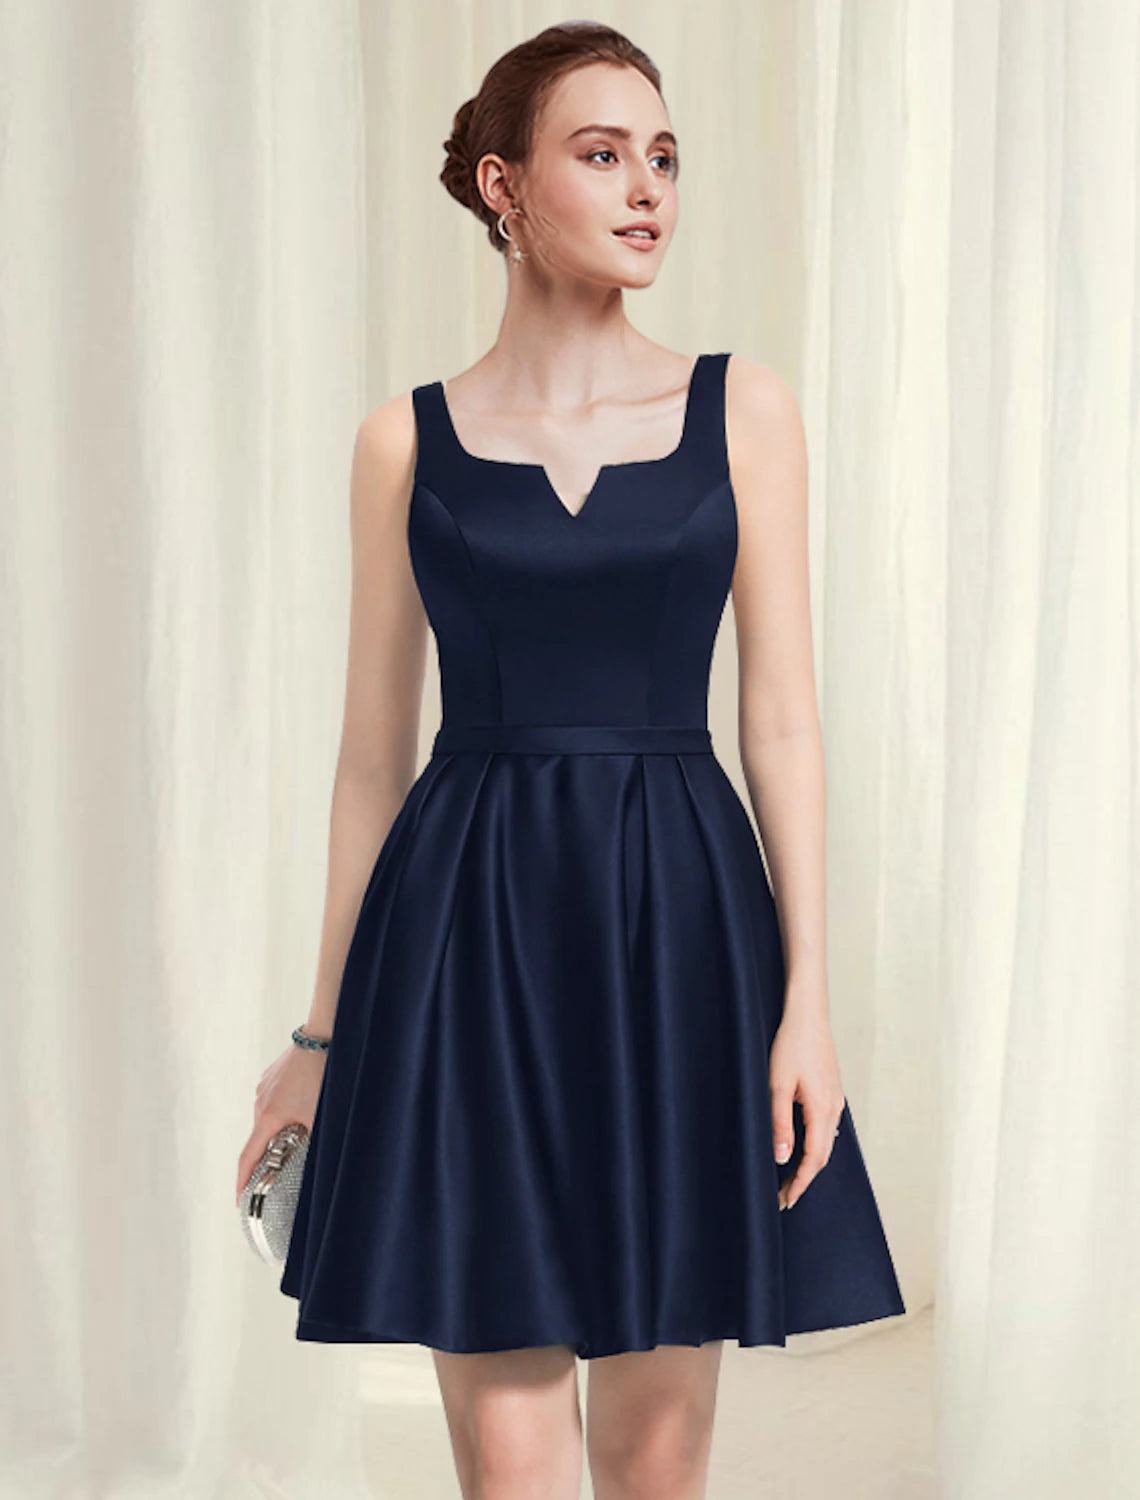 A-Line Cocktail Dresses Black Dress Homecoming Party Wear Short / Mini Sleeveless Scoop Neck Satin with Pleats